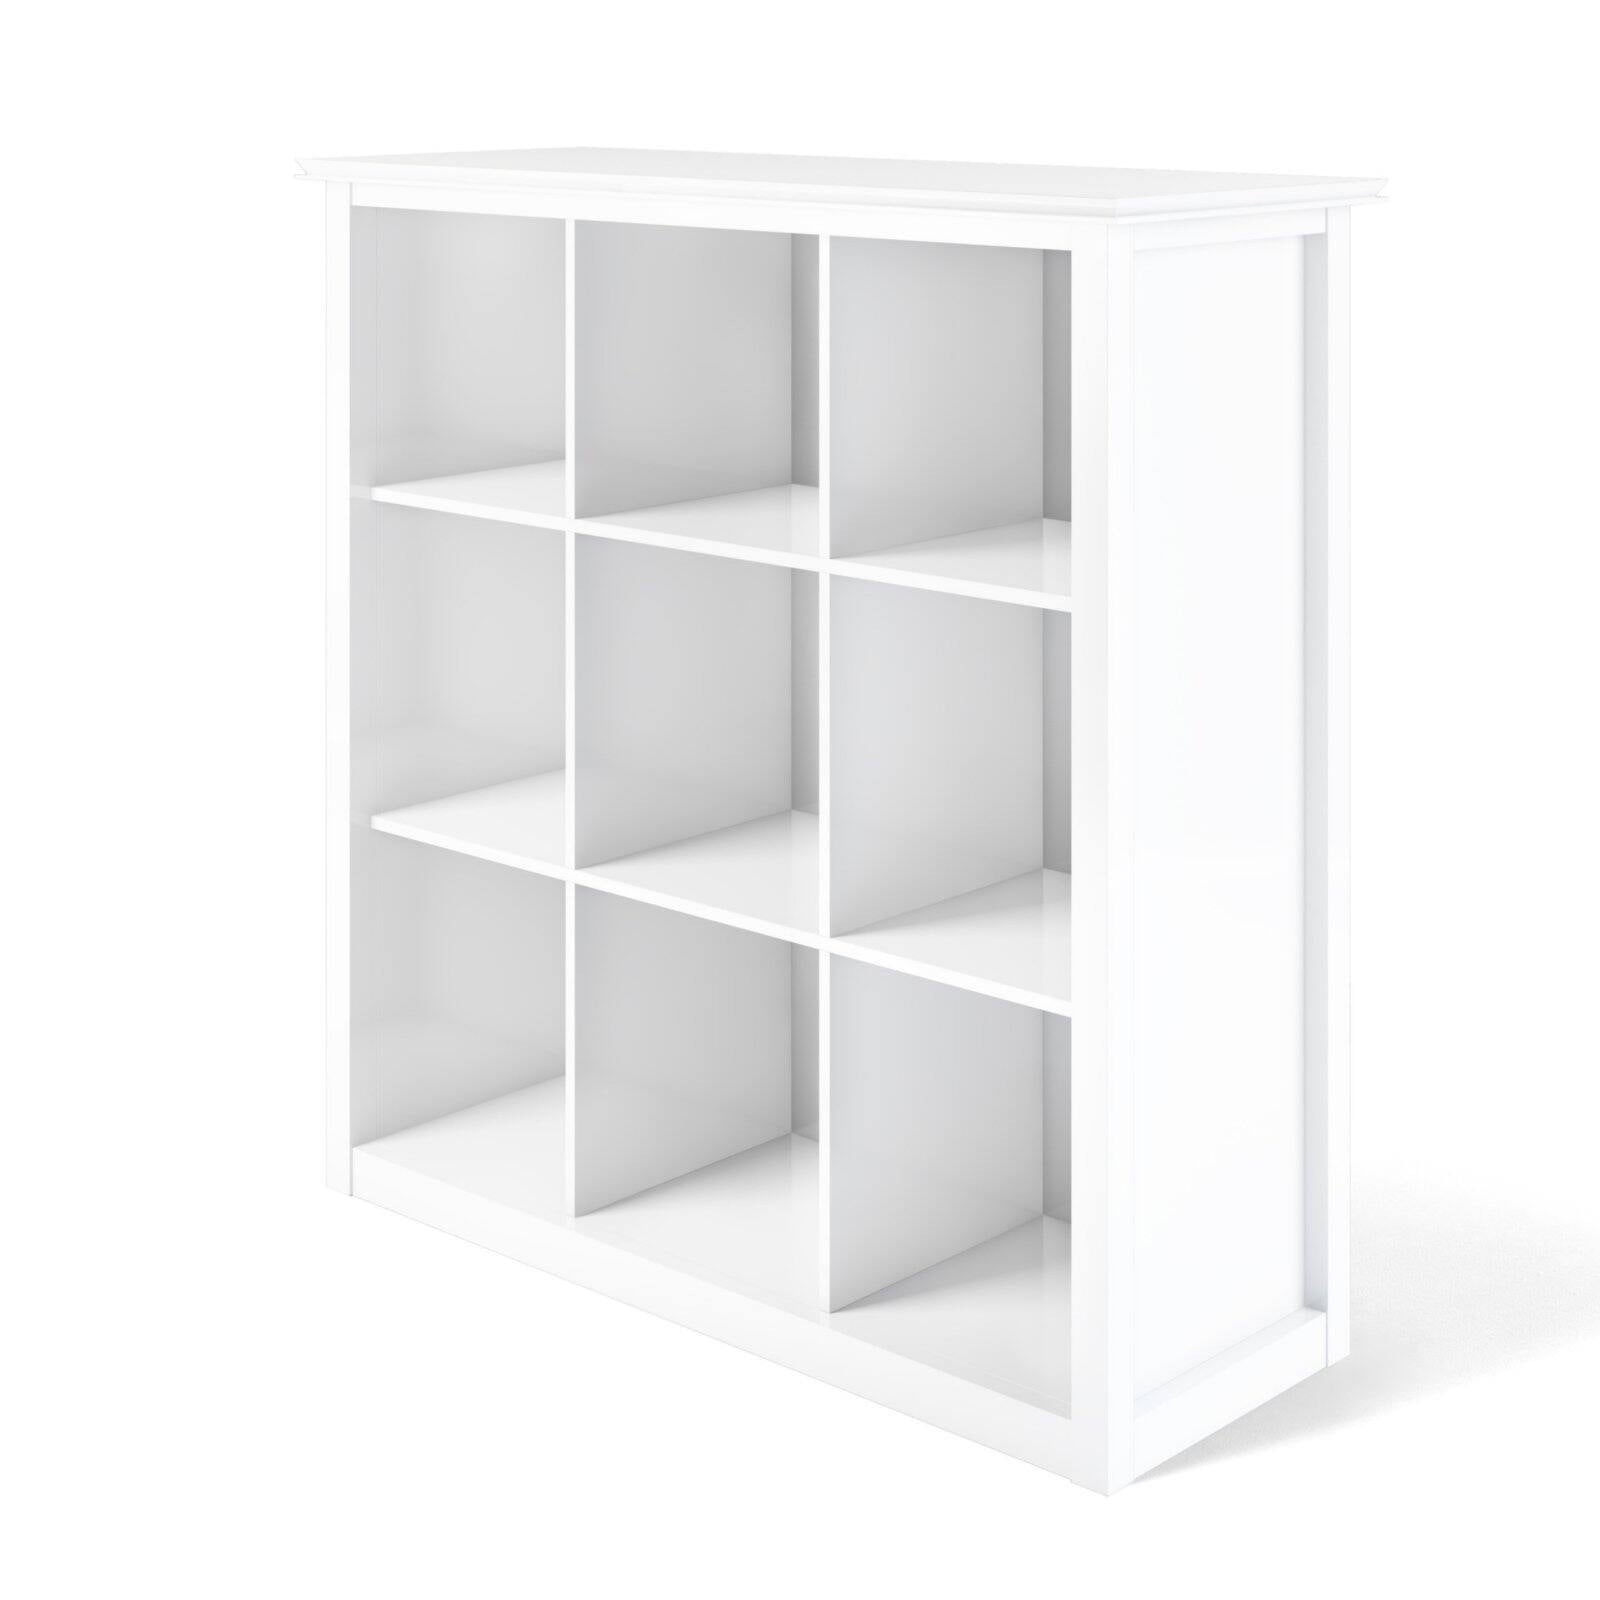 Olpchee Office Cubicle Shelf Cubicle Storage Organizer Cubicle Accessories  Height Adjustable Cubicle Corner Shelf with Adjustable Hooks (White)